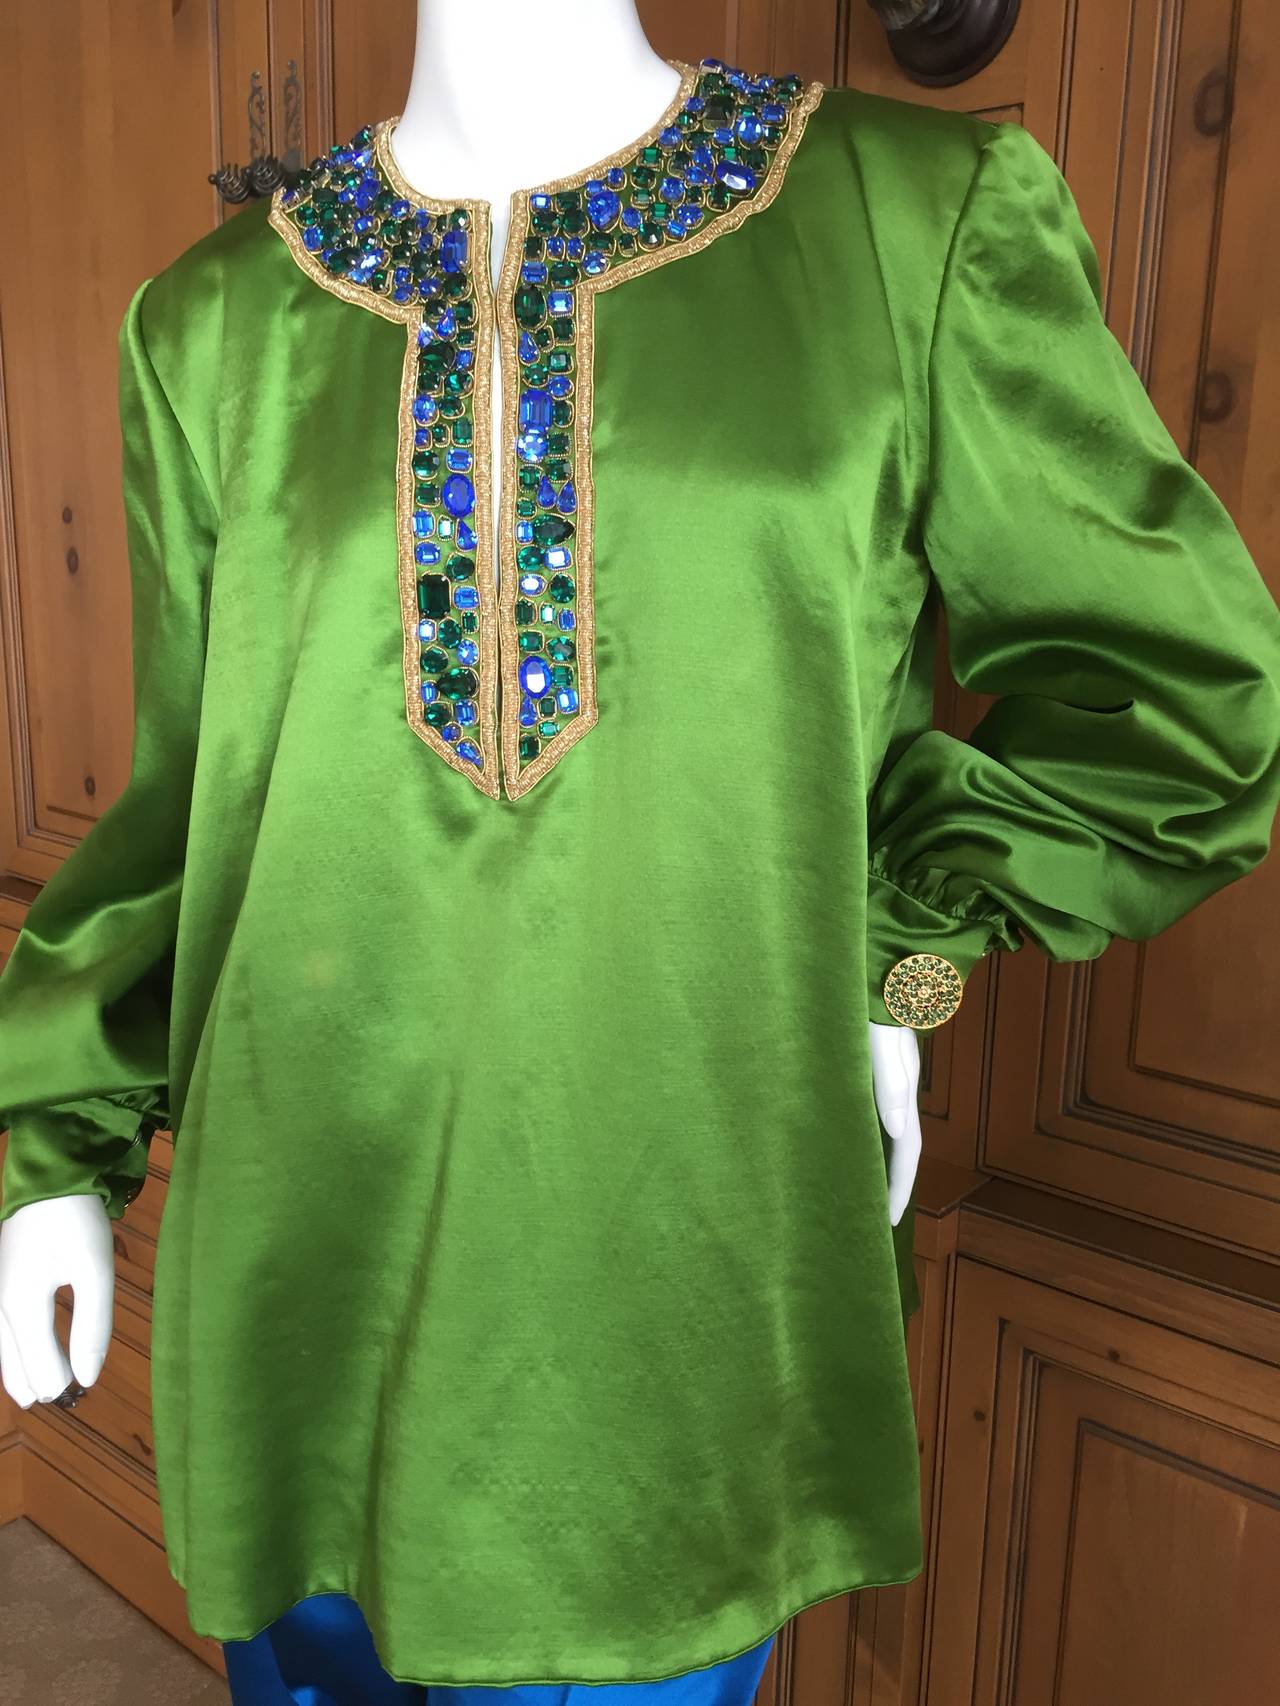 Beautiful Jewel tone silk duchesse satin tunic and pant suit from Givenchy Haute Couture circa 1990.
Emblazened with large Swarovski crystals  around yoke.
Cut large, this would be a size L.
This was in the Sotheby''s /Kerry Taylor Auction in